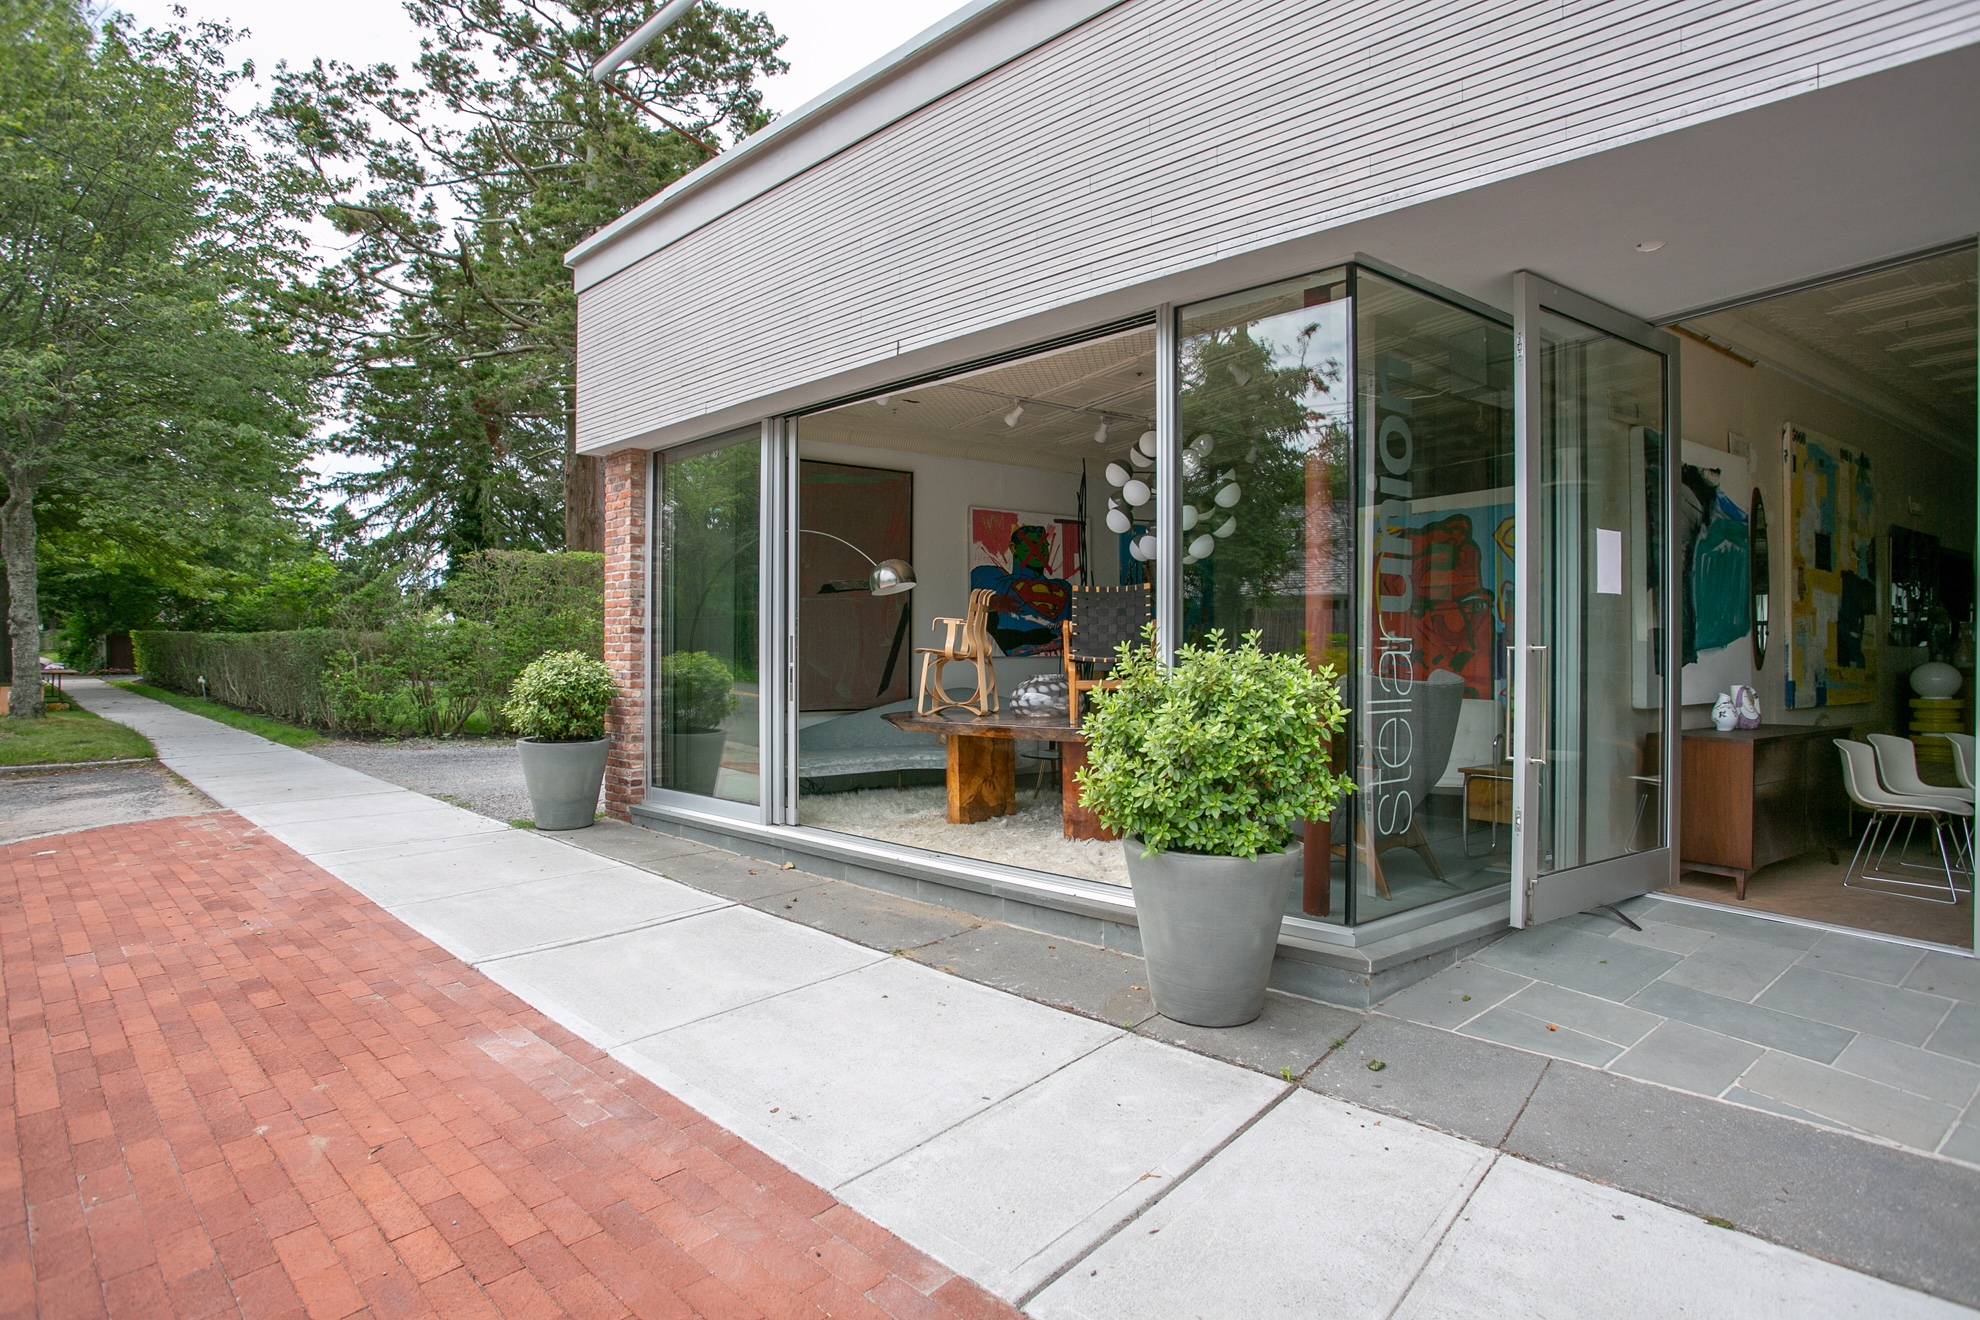 CONTEMPORARY, STYLISH BUILDING IN SOUTHAMPTON VILLAGE